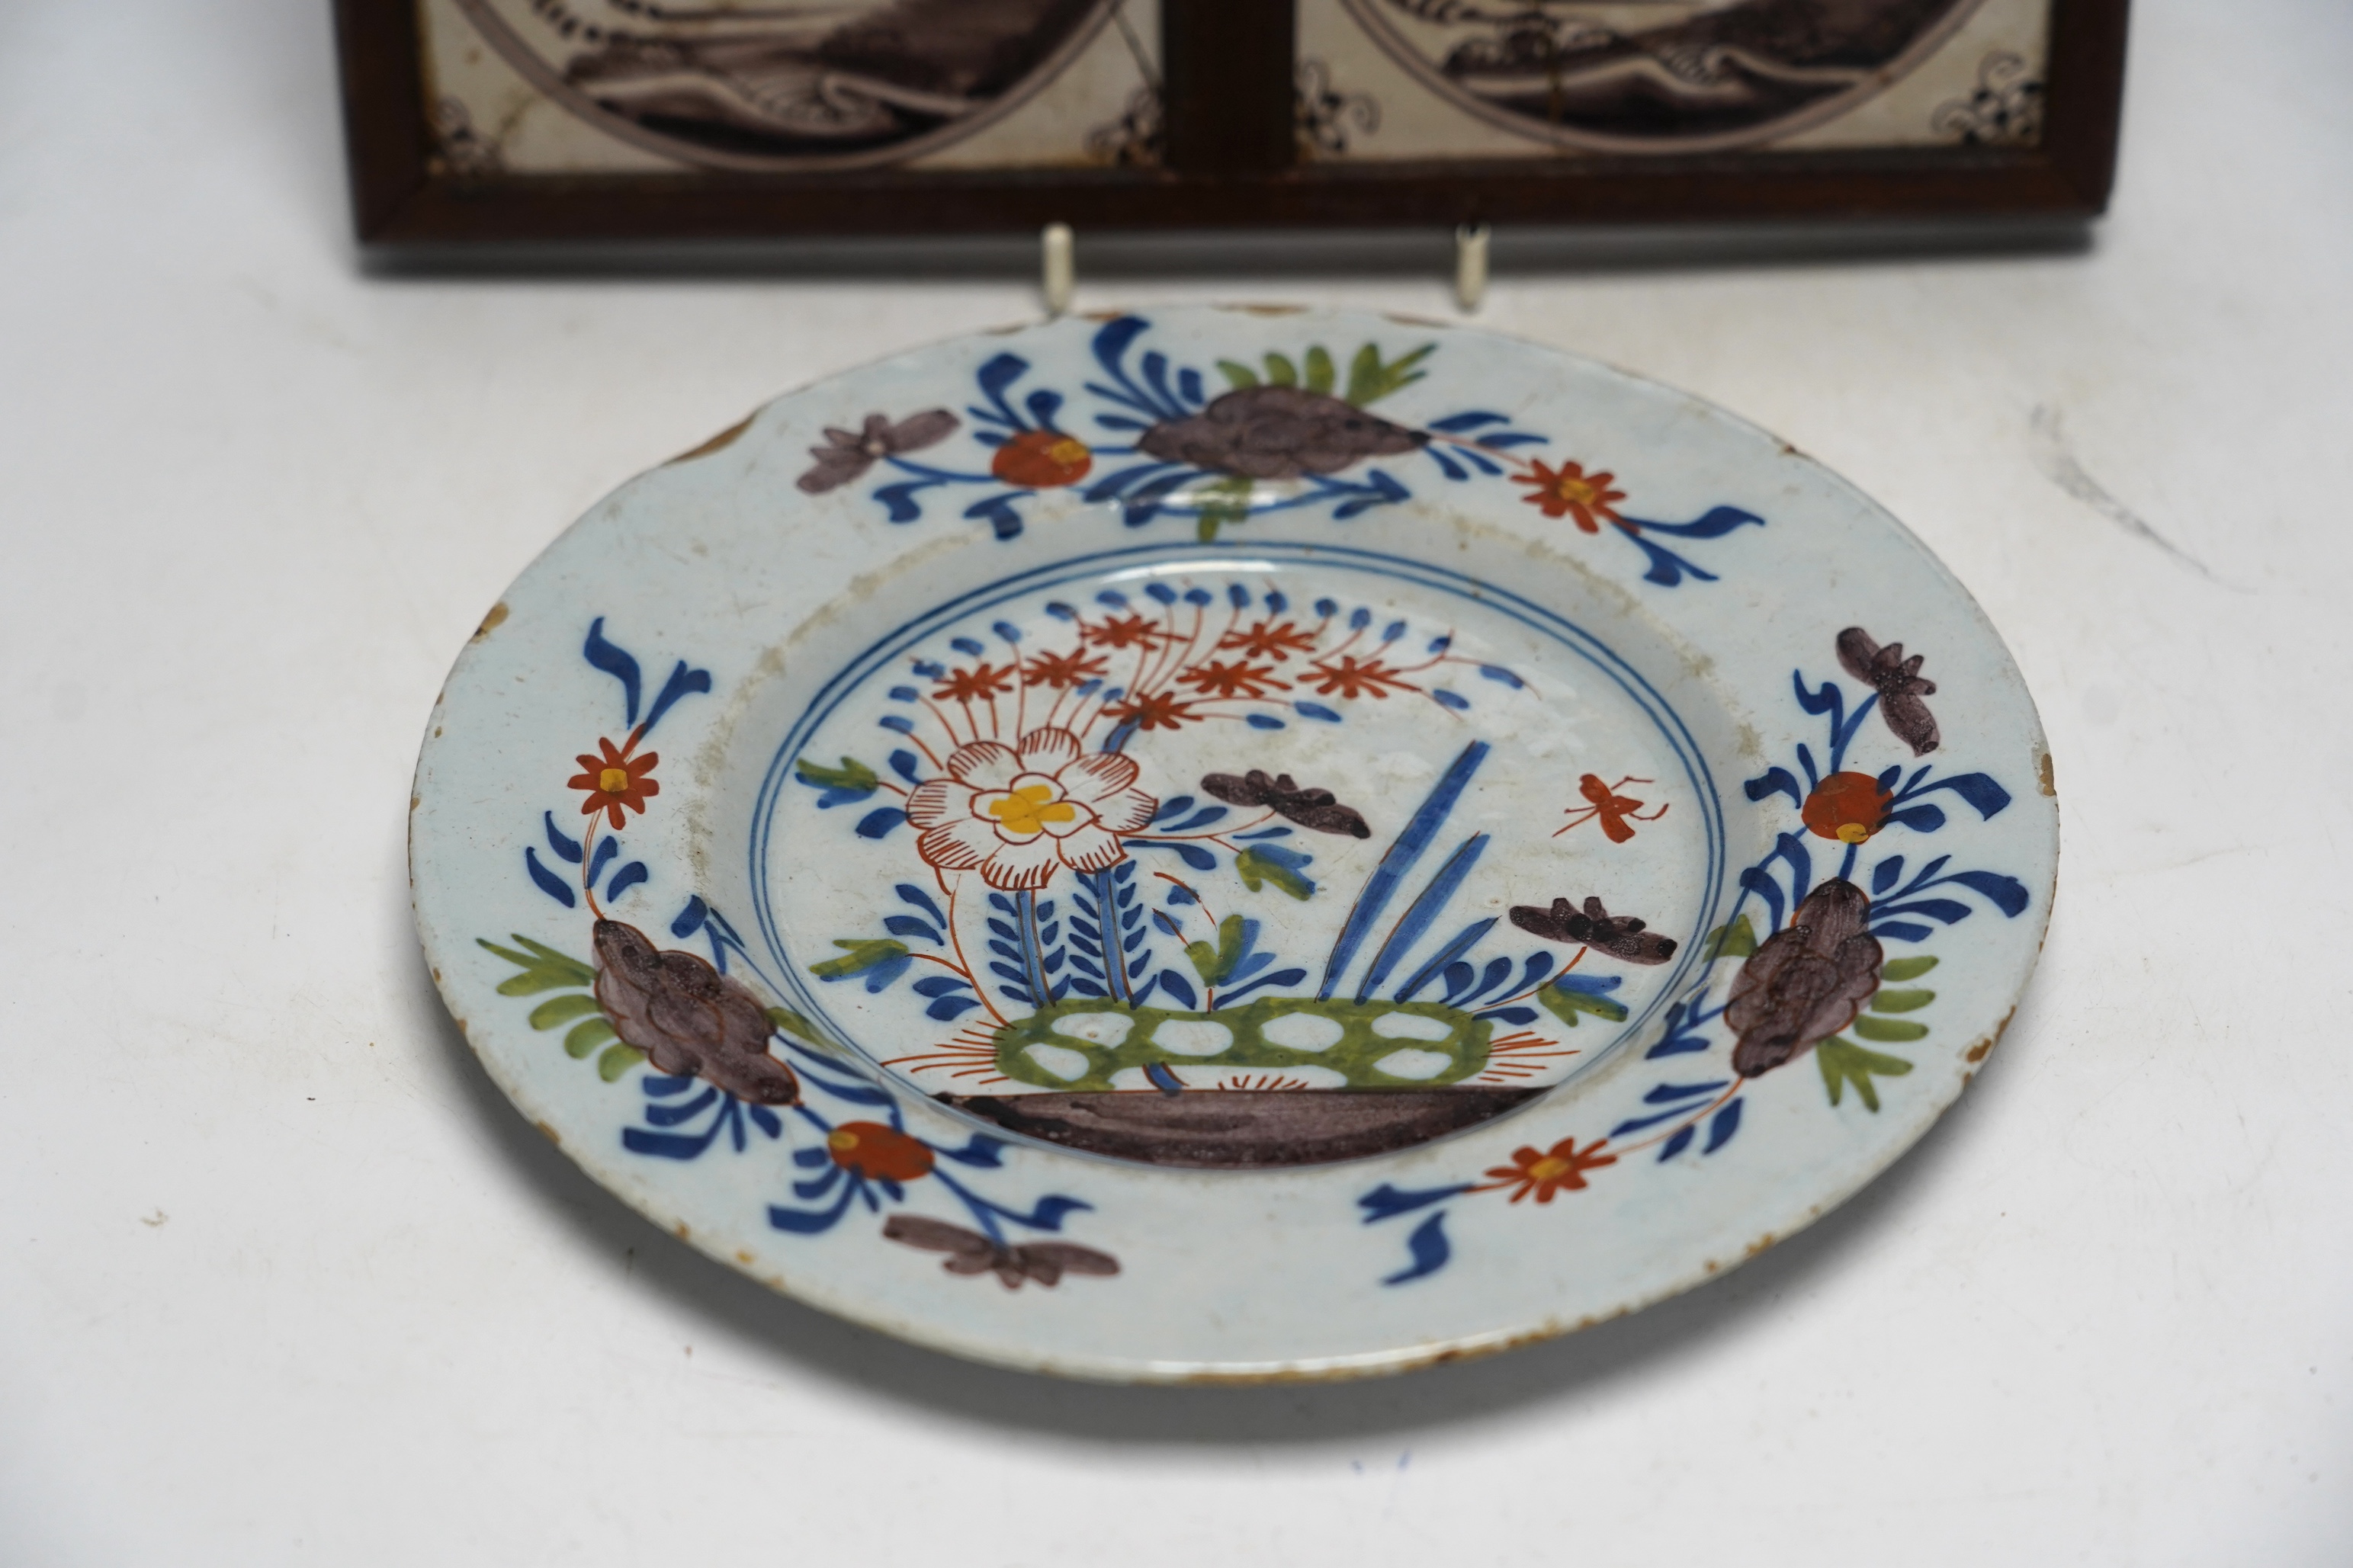 An 18th century Delft polychrome plate, 23cm diameter and two framed tiles